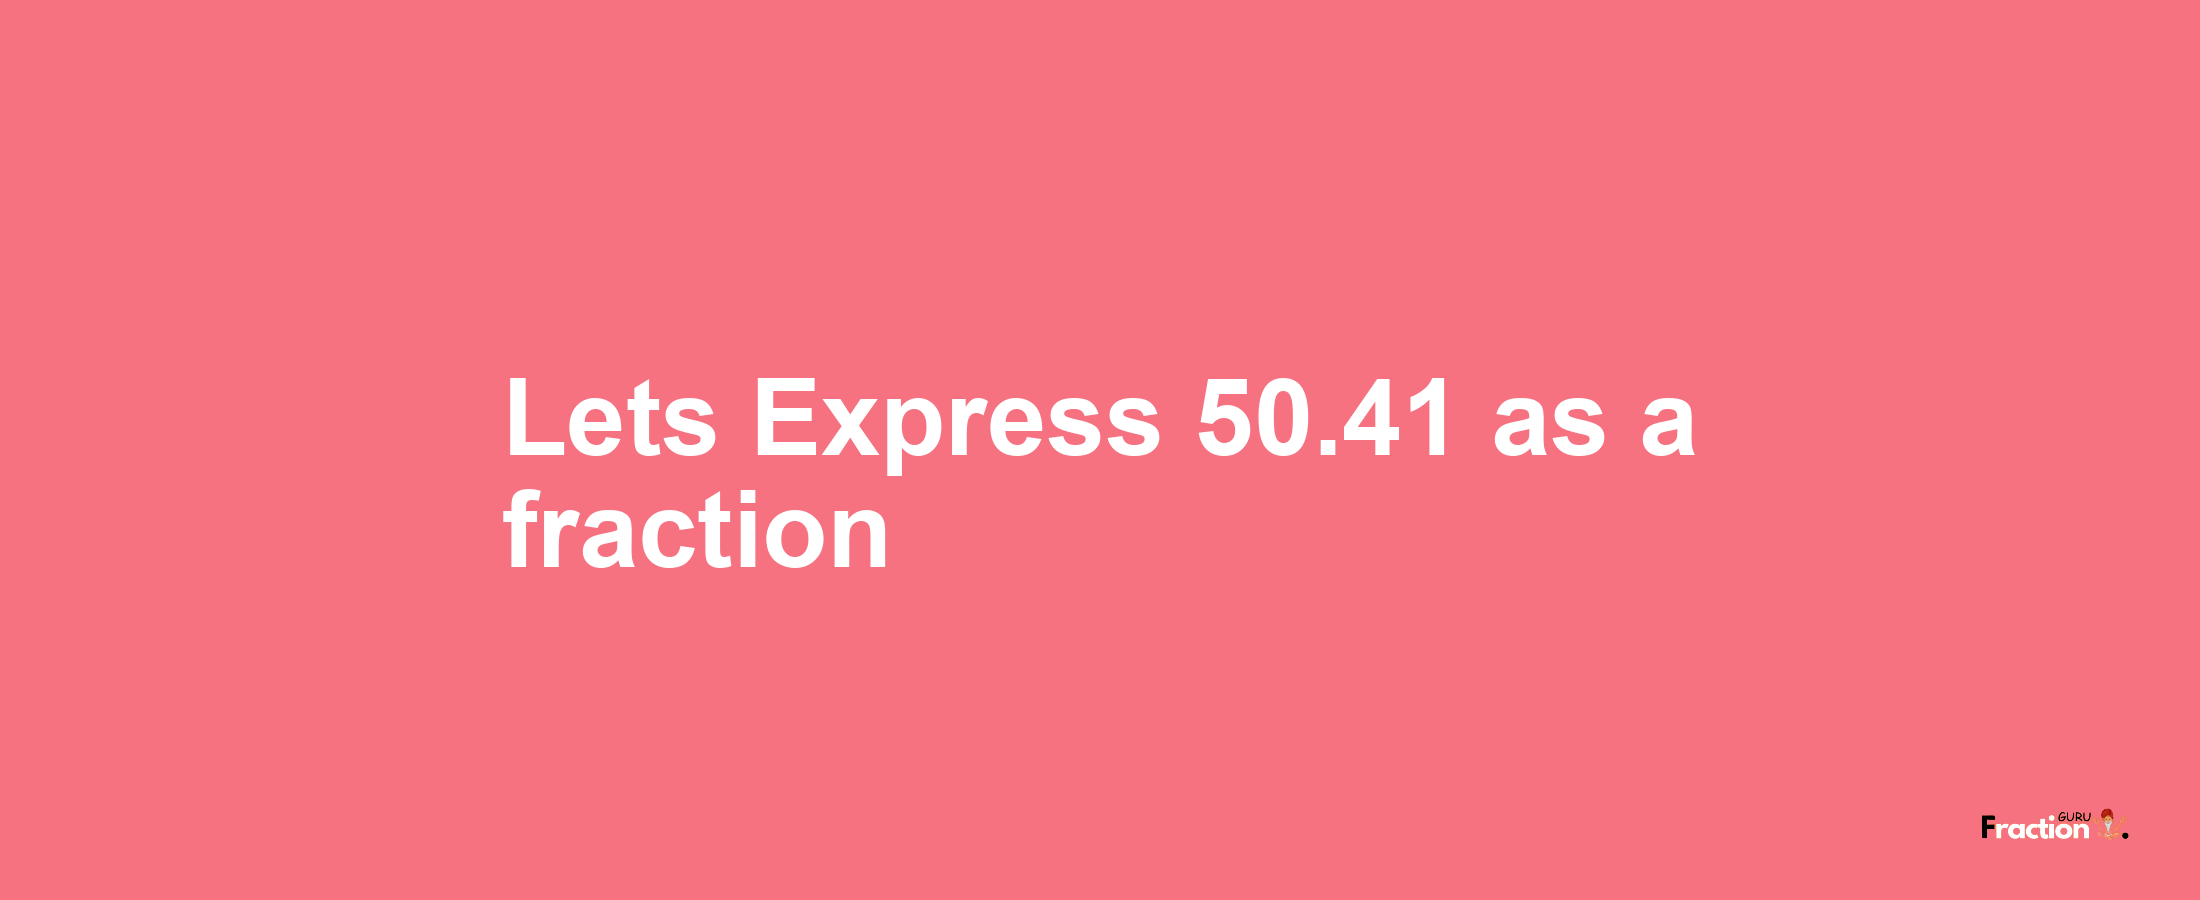 Lets Express 50.41 as afraction